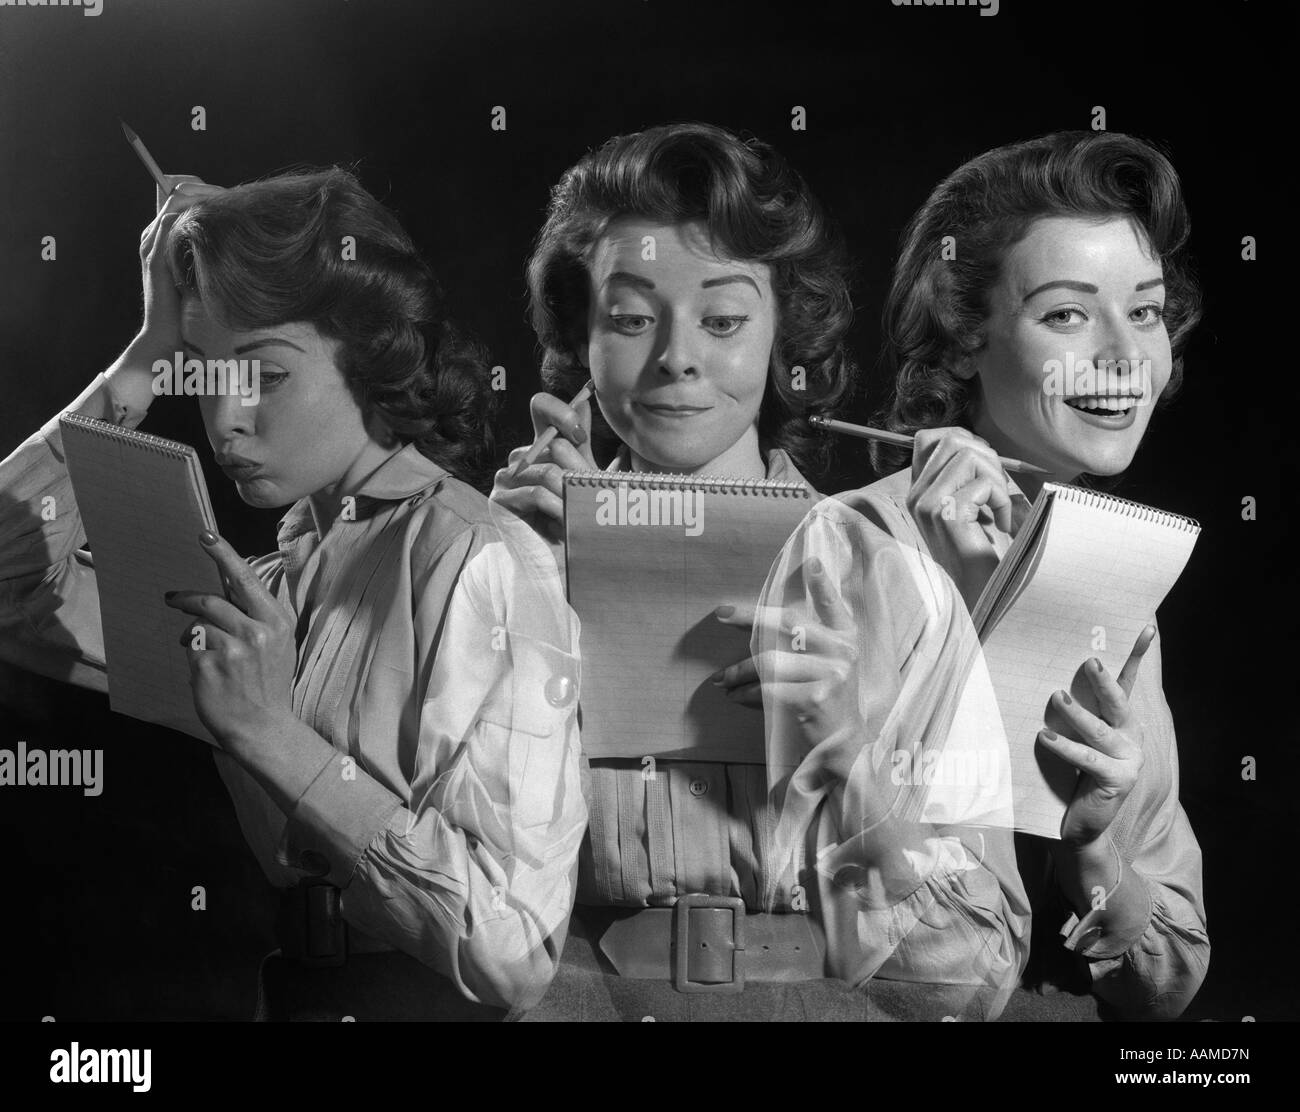 1950s WOMAN OFFICE WORKER HOLDING PENCIL AND NOTEPAD MAKING VARIOUS FACIAL EXPRESSIONS PRINTED THREE TIMES Stock Photo